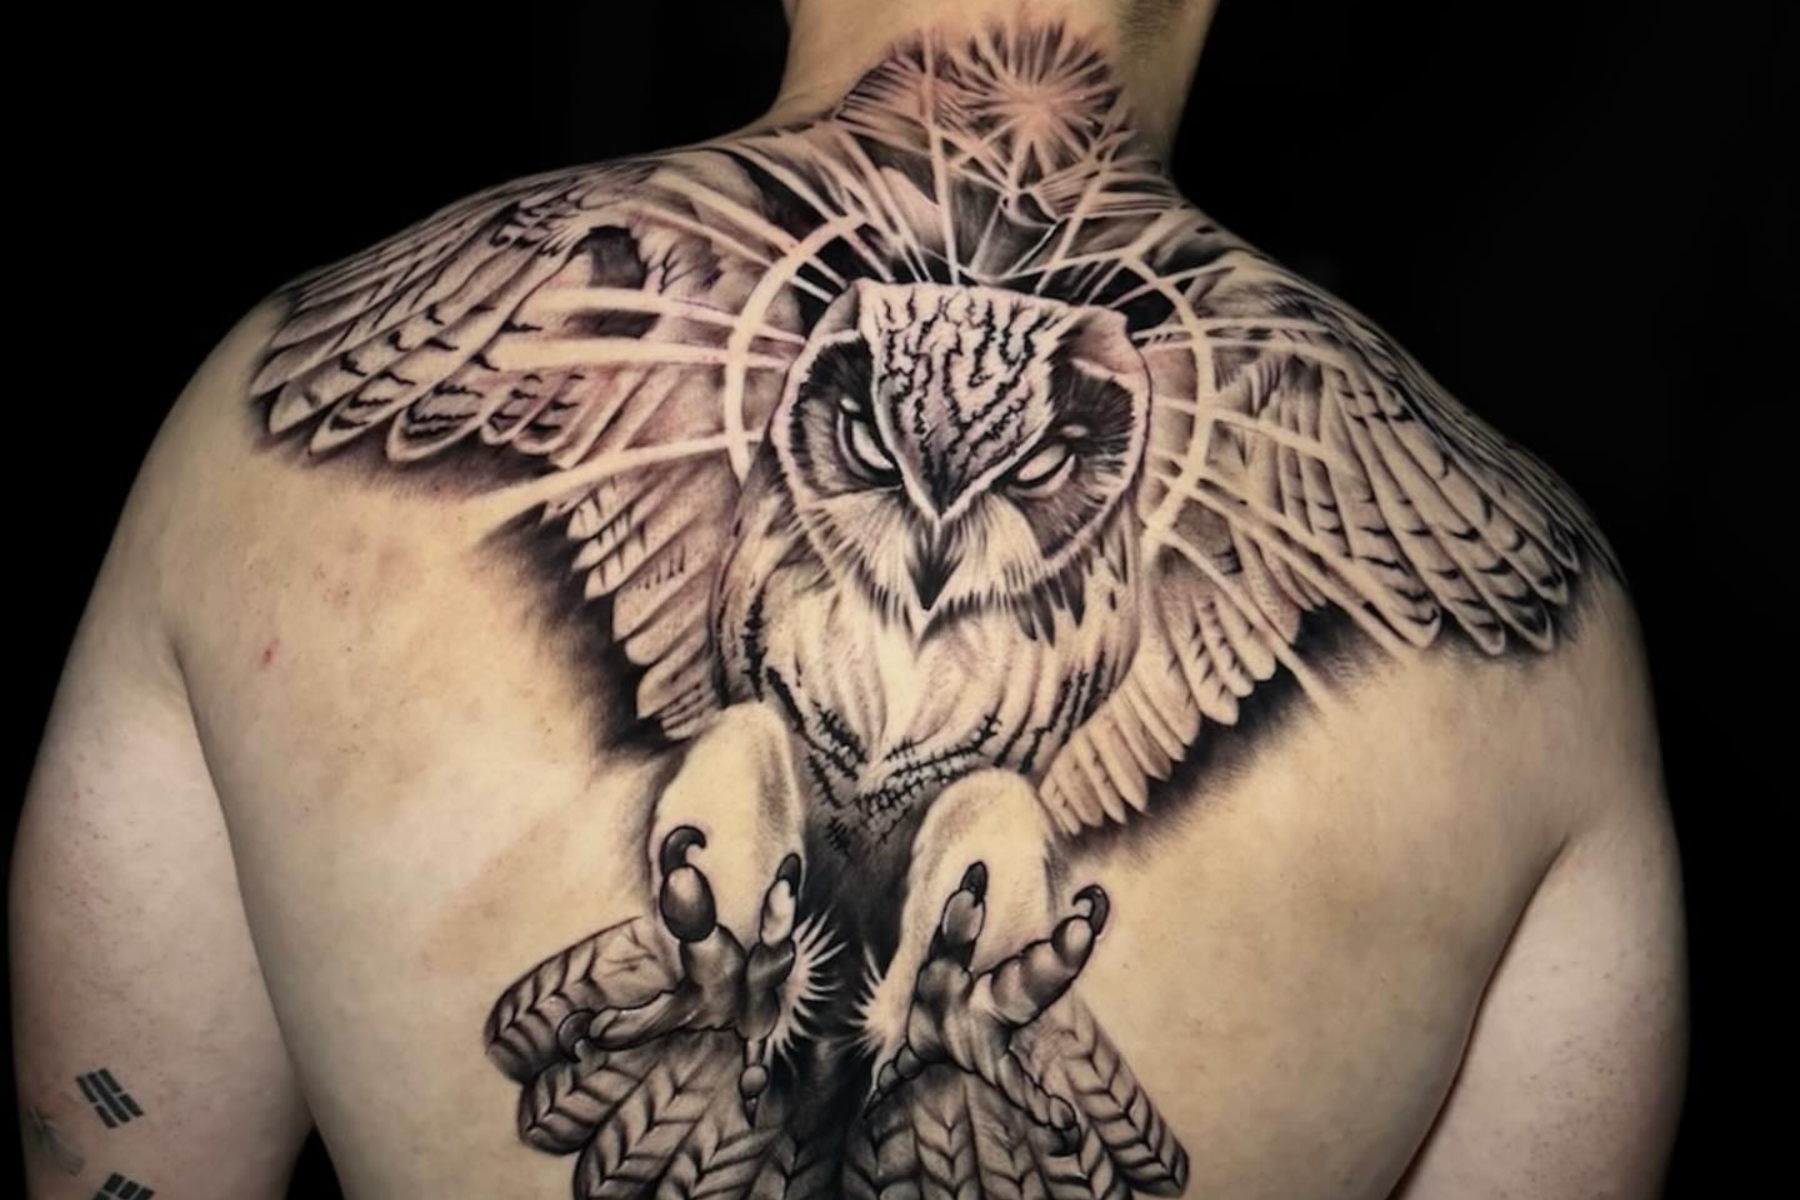 A man has an owl tattoo on his upper and middle back